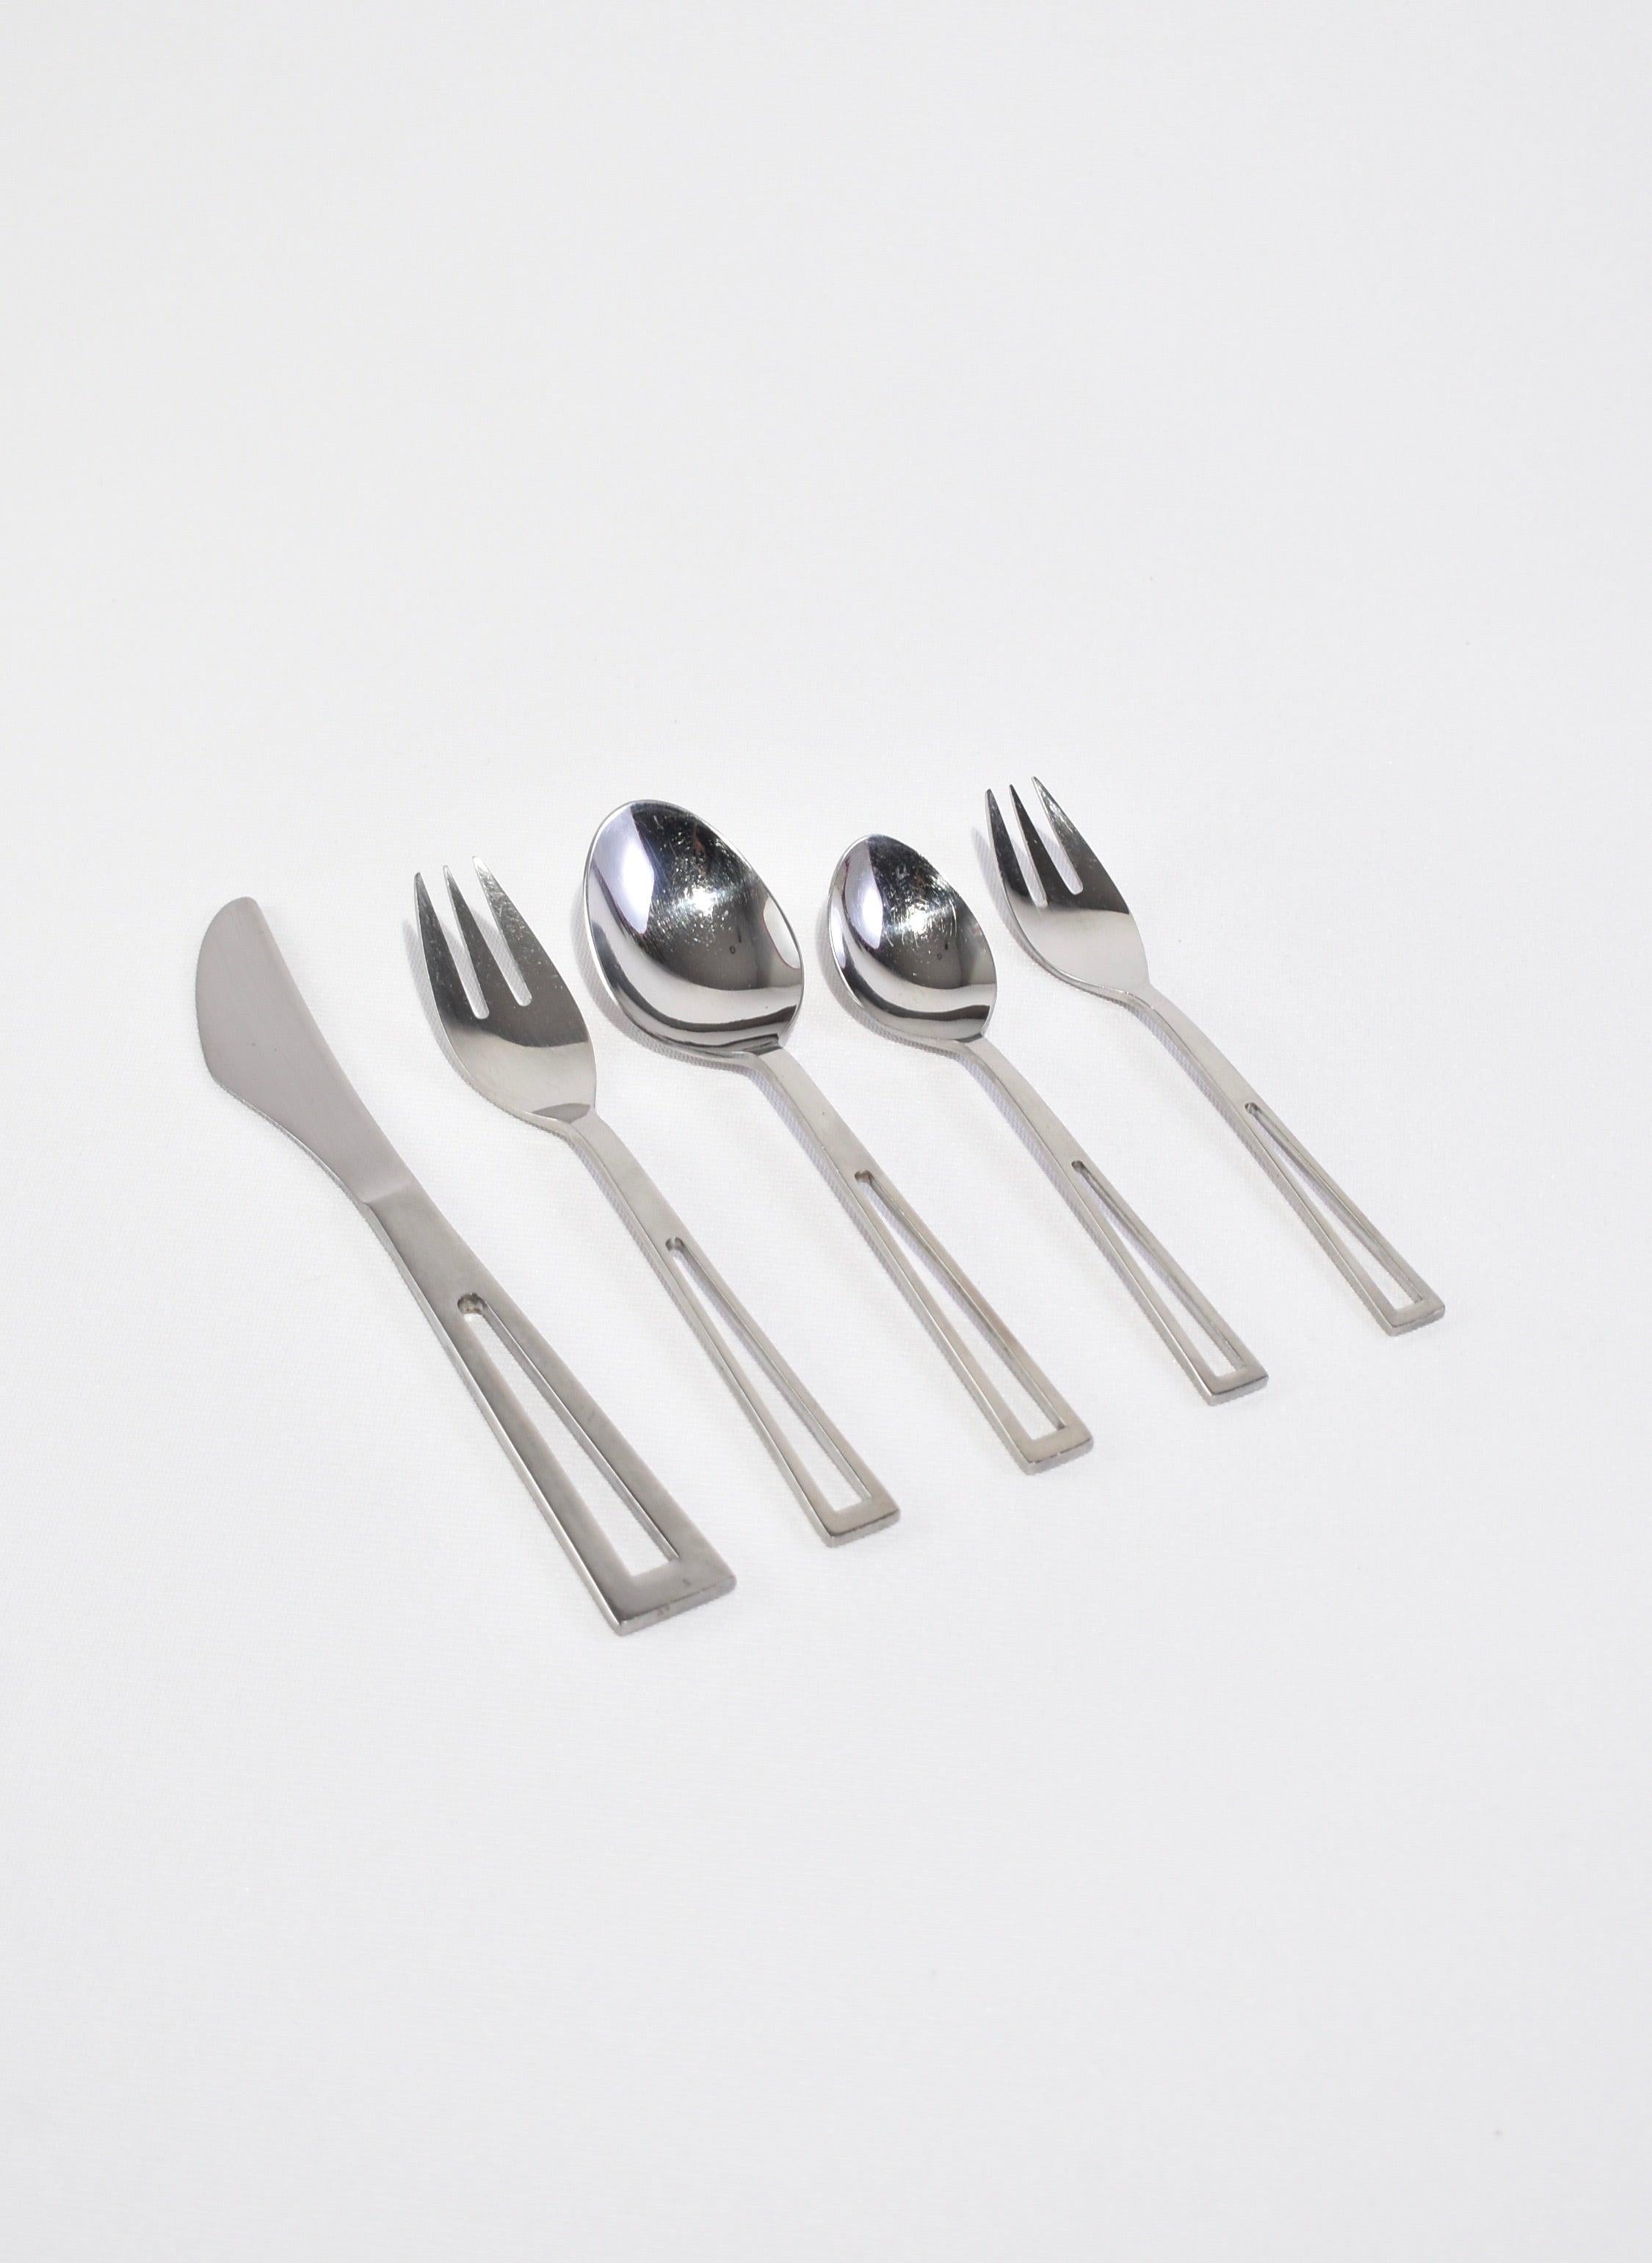 Vintage, stainless steel flatware set of five pieces (knife, two spoons, two forks) with cutout handle detail. Signed Supreme Cutlery, Made in ?Japan.?

Purchase includes one set of five pieces.
 